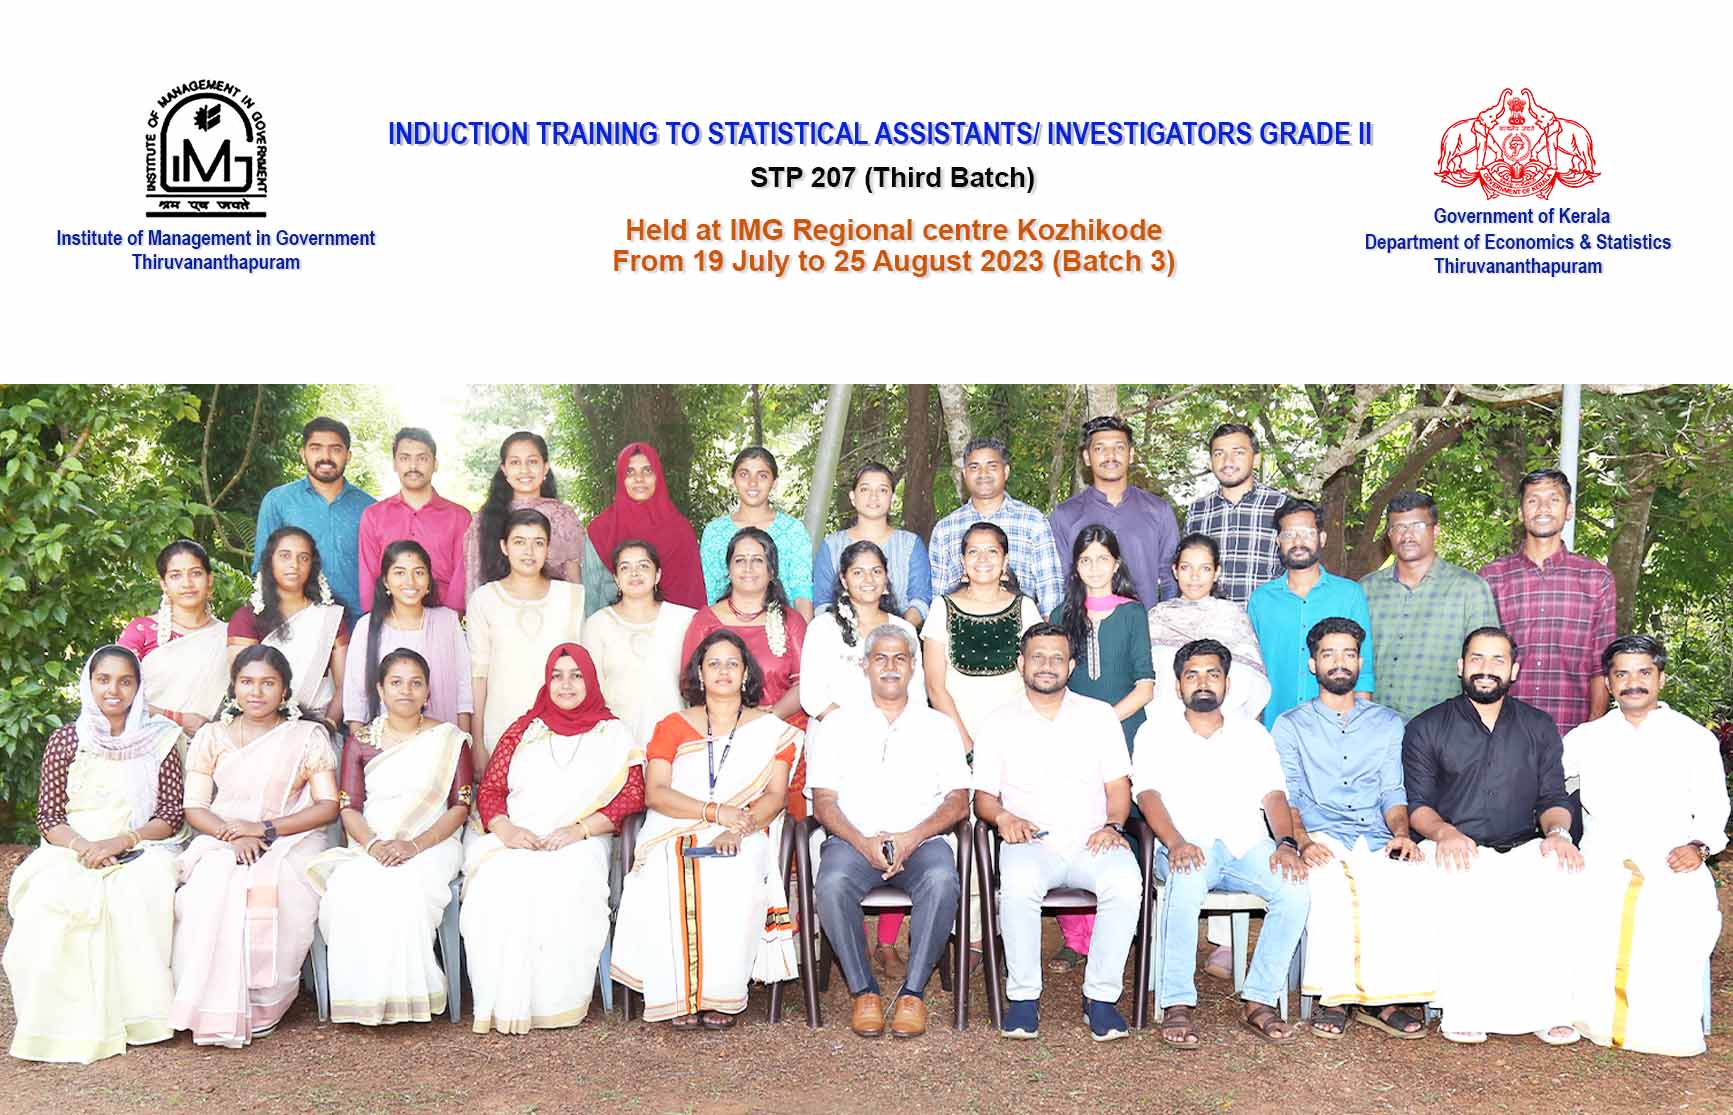 Induction Training to Statistical Assistants Grade II held at IMG Kozhikode 3rd Batch from 19-7 to 26-8 2023